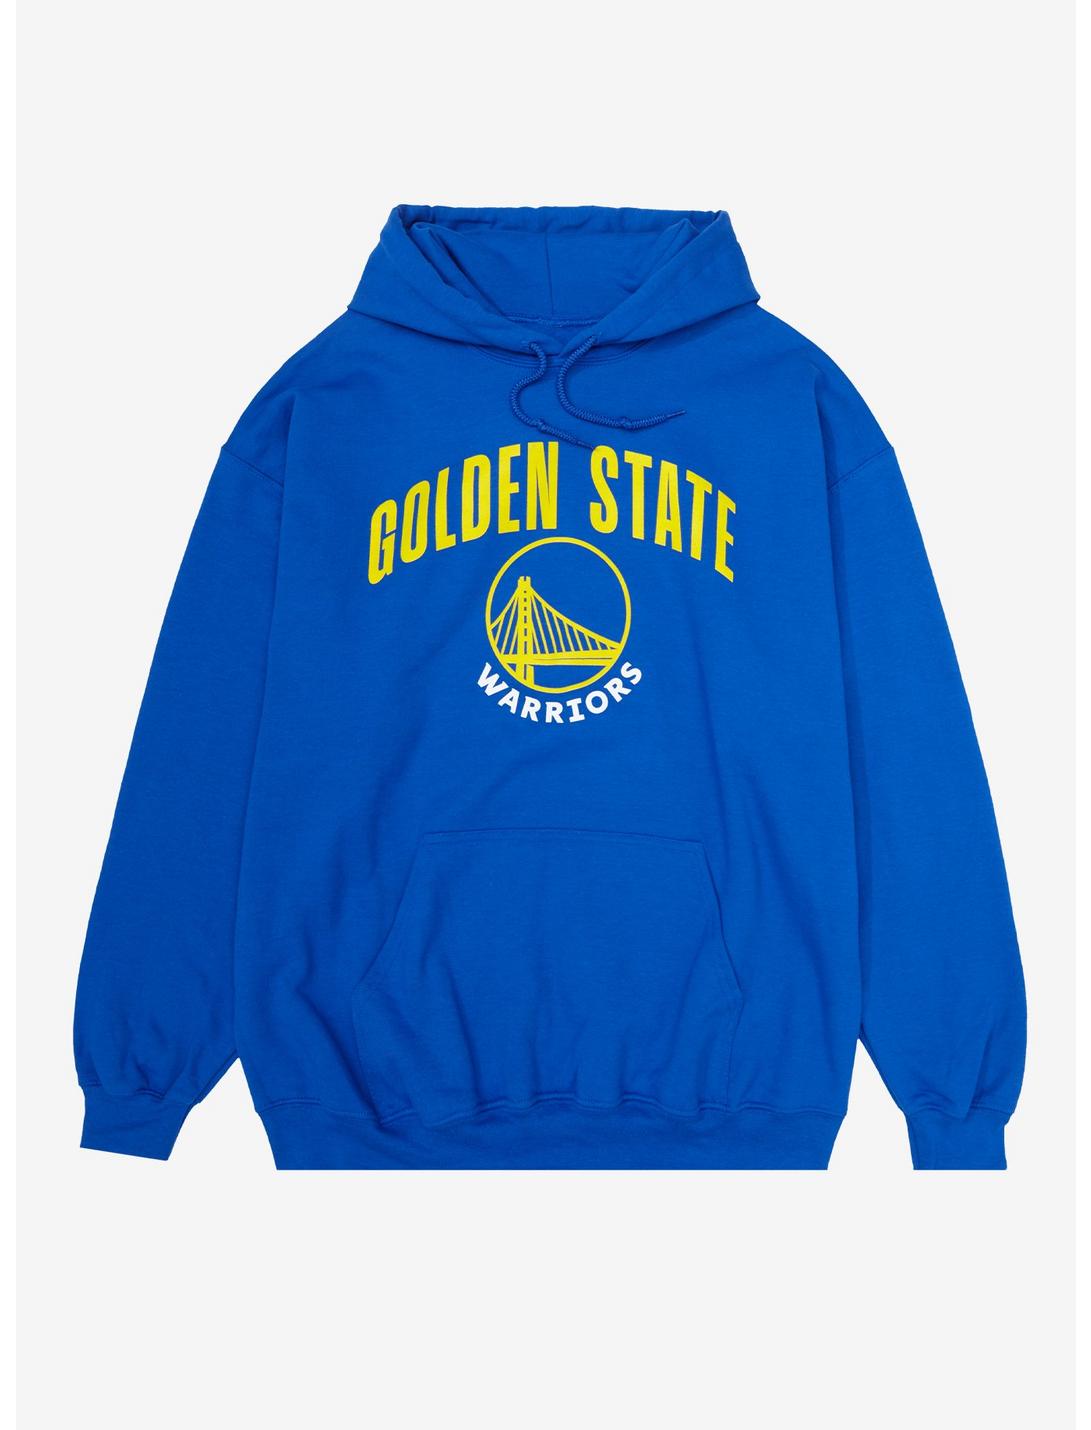 Her Universe NBA Golden State Warriors Hoodie Plus Size, ROYAL BLUE, hi-res